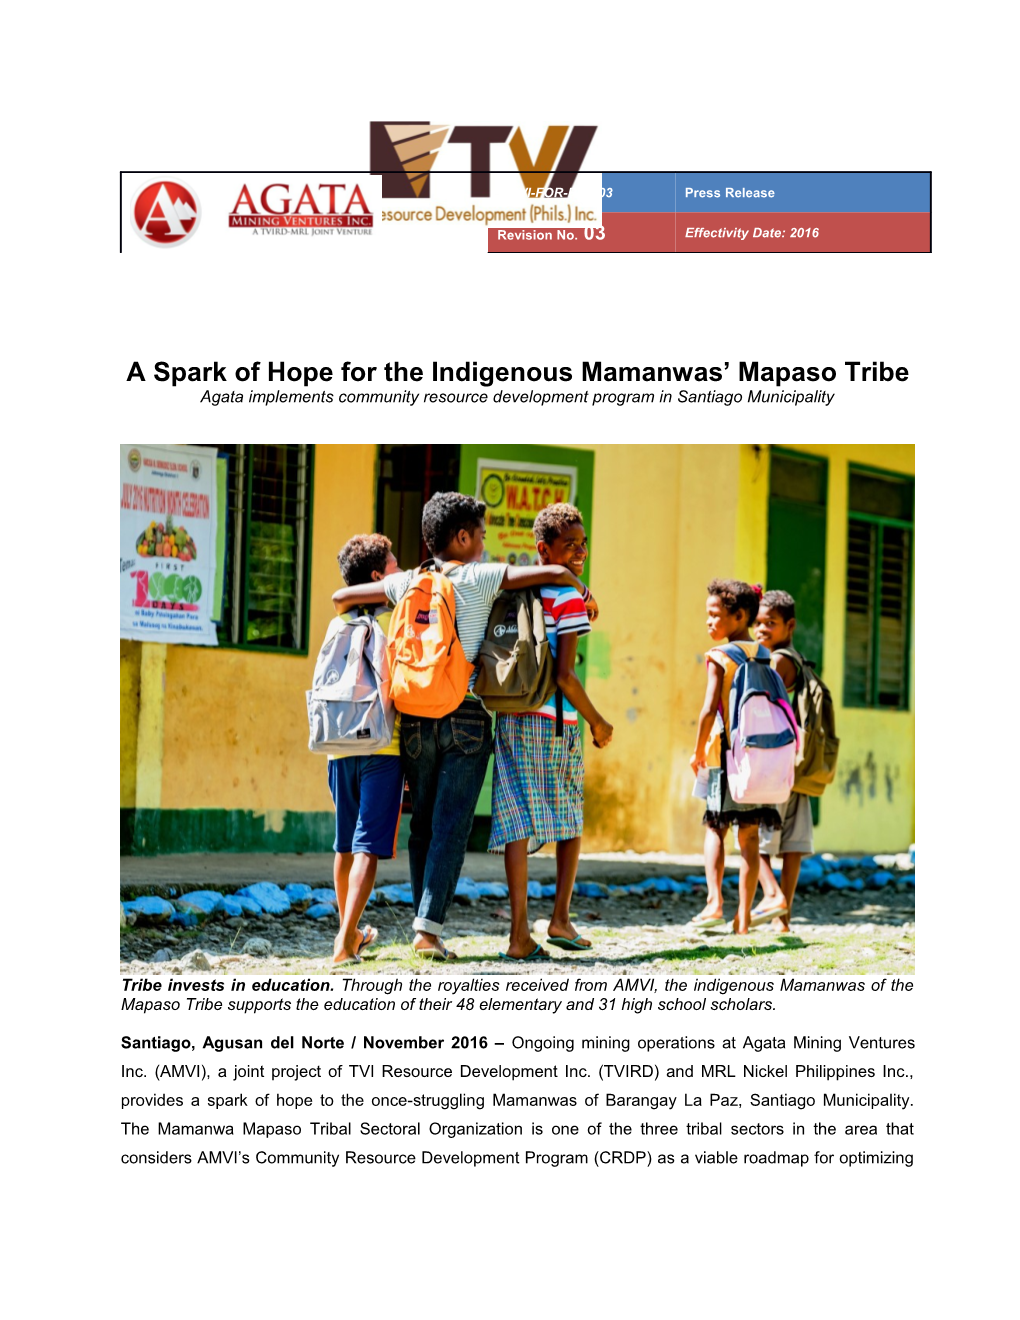 A Spark of Hope for the Indigenous Mamanwas Mapaso Tribe